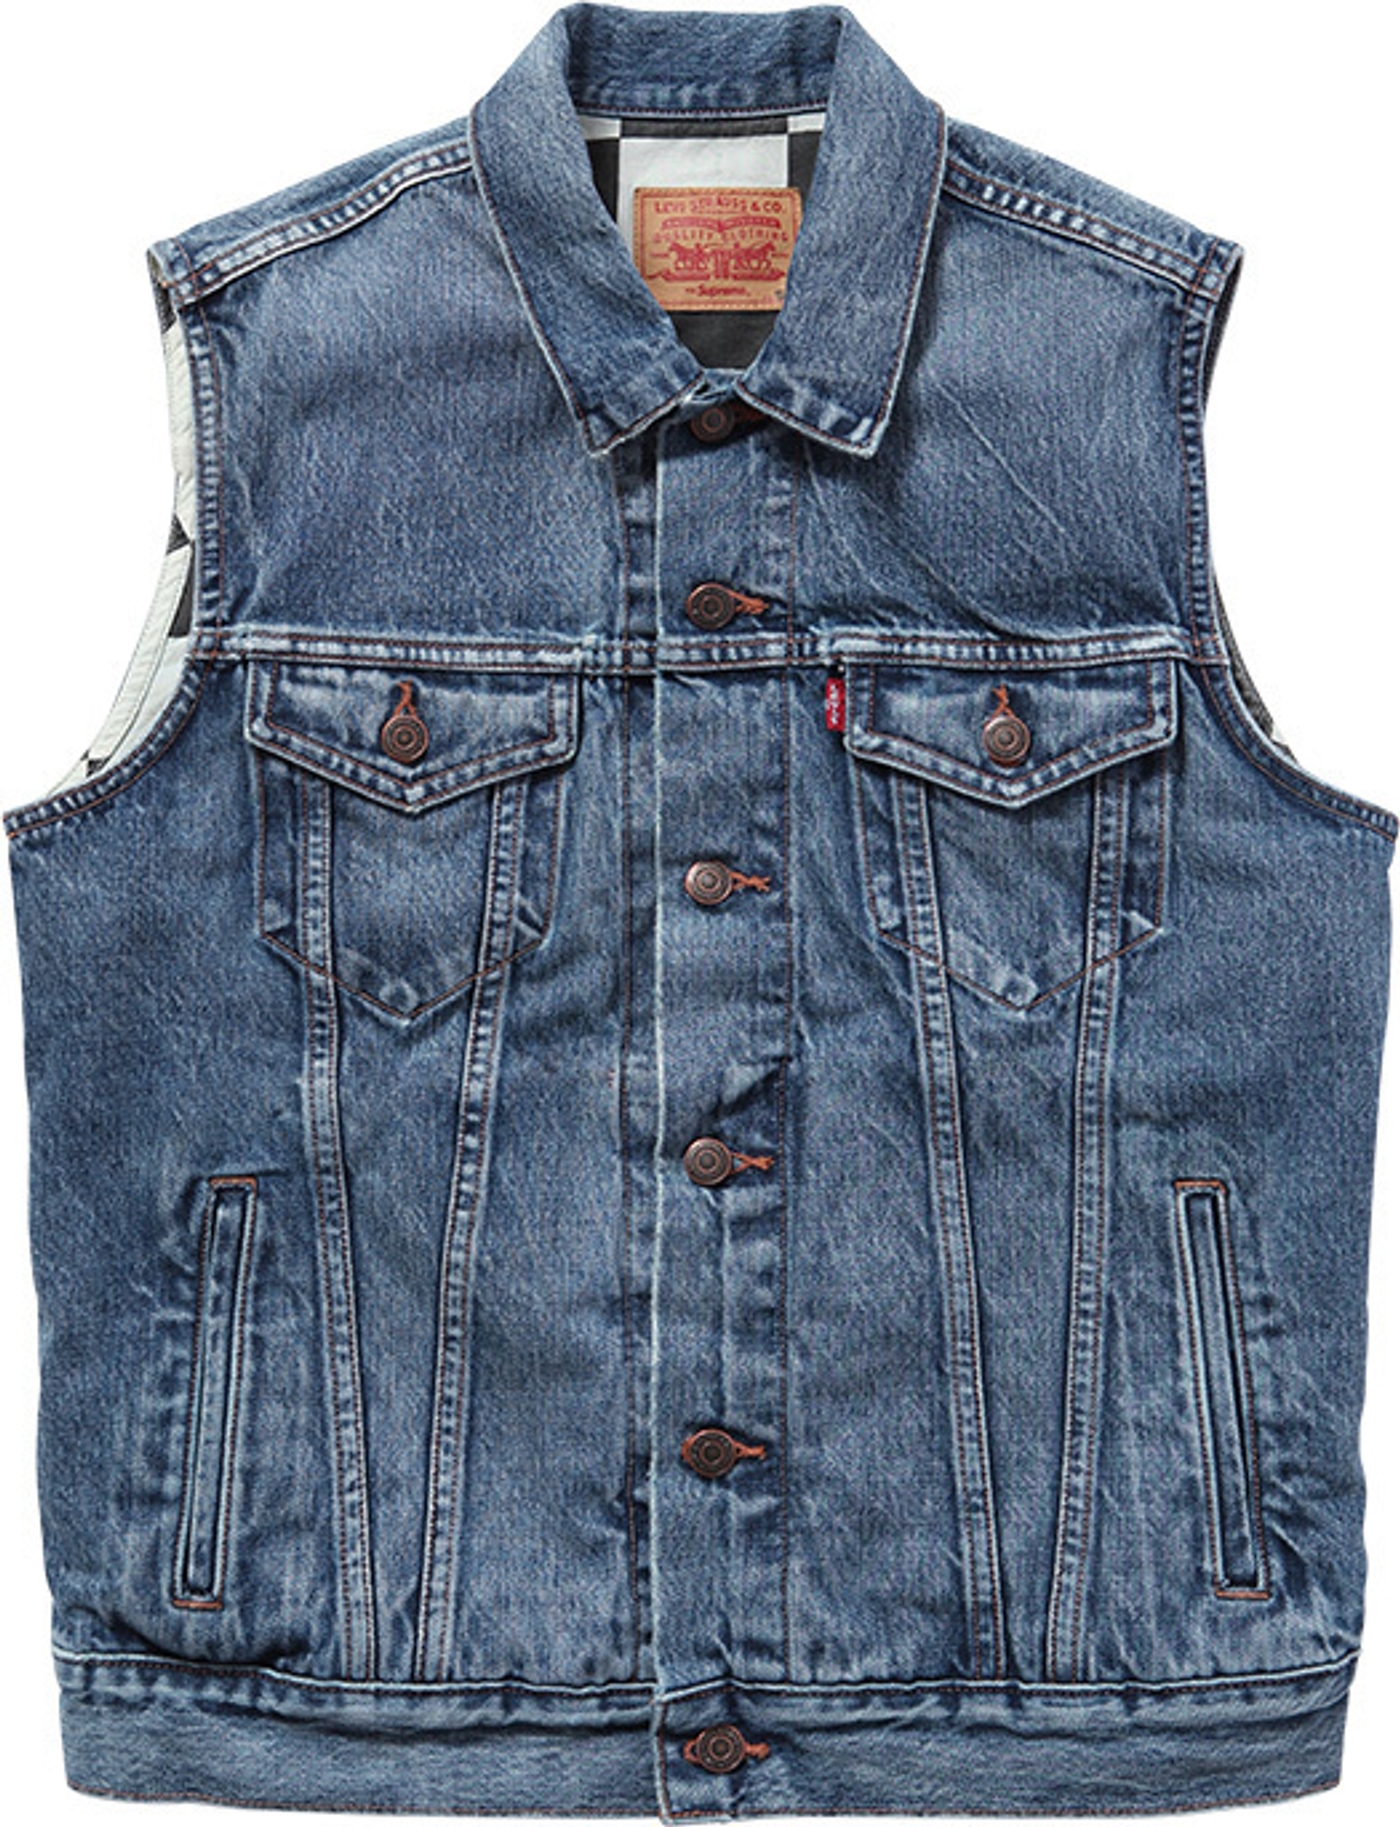 Custom fit Trucker Vest 
Cotton 13 oz. selvedge denim with cotton twill lining. <br>Made In The U.S.A. (6/9)